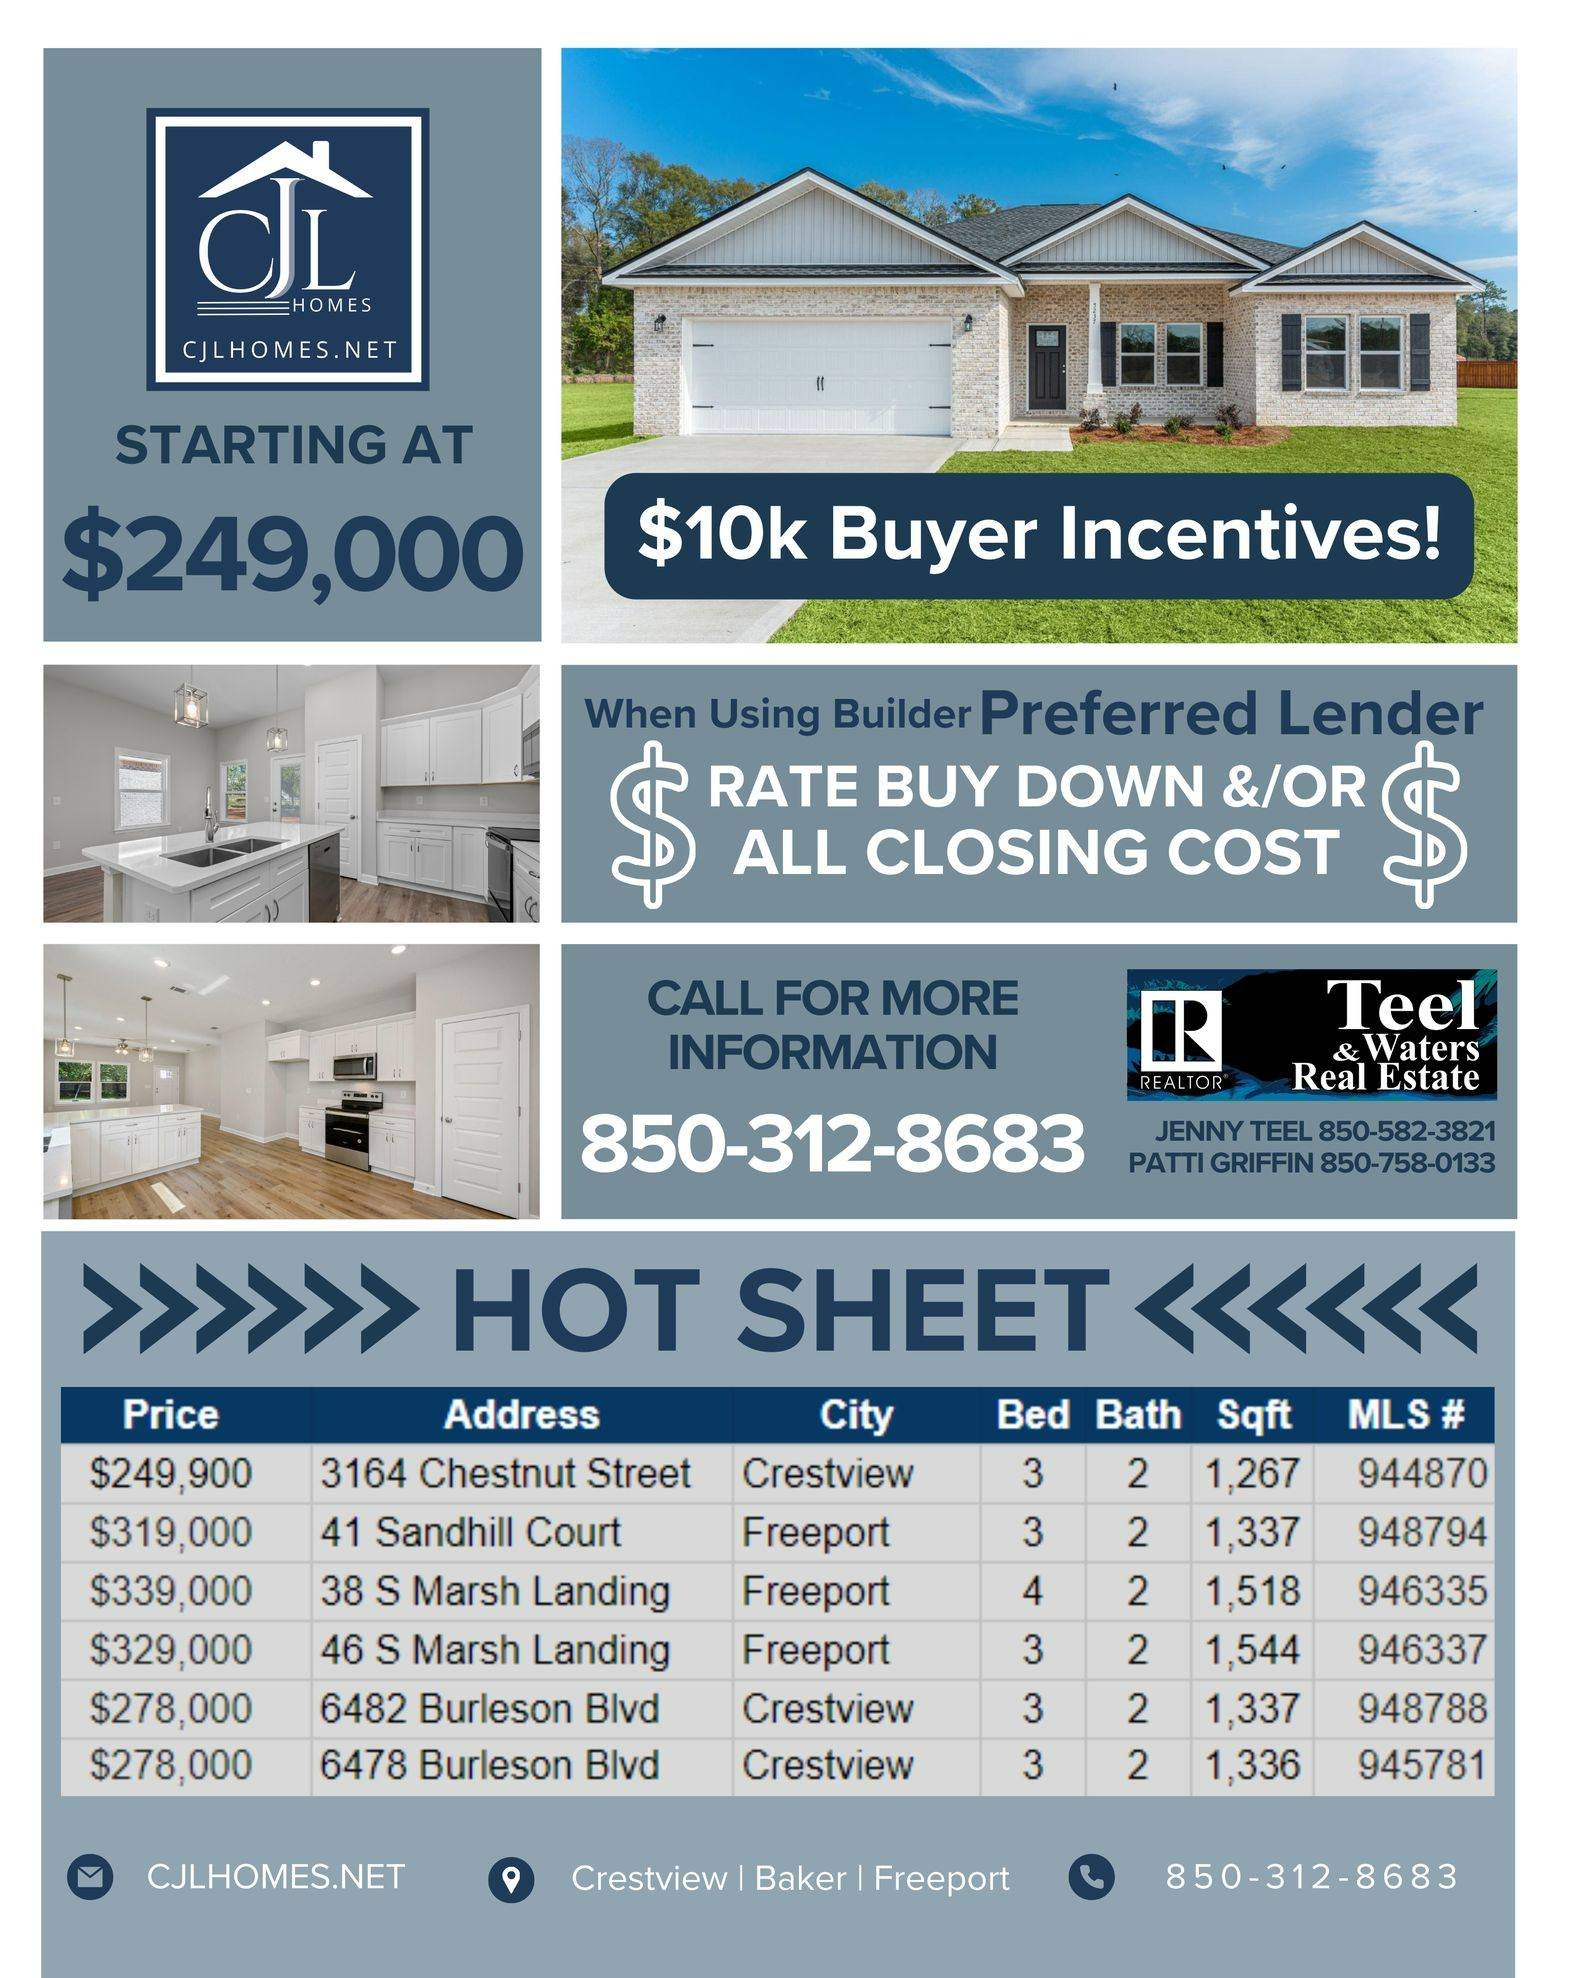 🔥🏠 **Hot Deal Alert from CJL Homes!** 🏠🔥
Searching for your dream home? Look no further! Starting at just $249,000, our homes in Crestview and Freeport are waiting for you! Plus, we're offering an exclusive buyer incentive: receive up to $10,000 